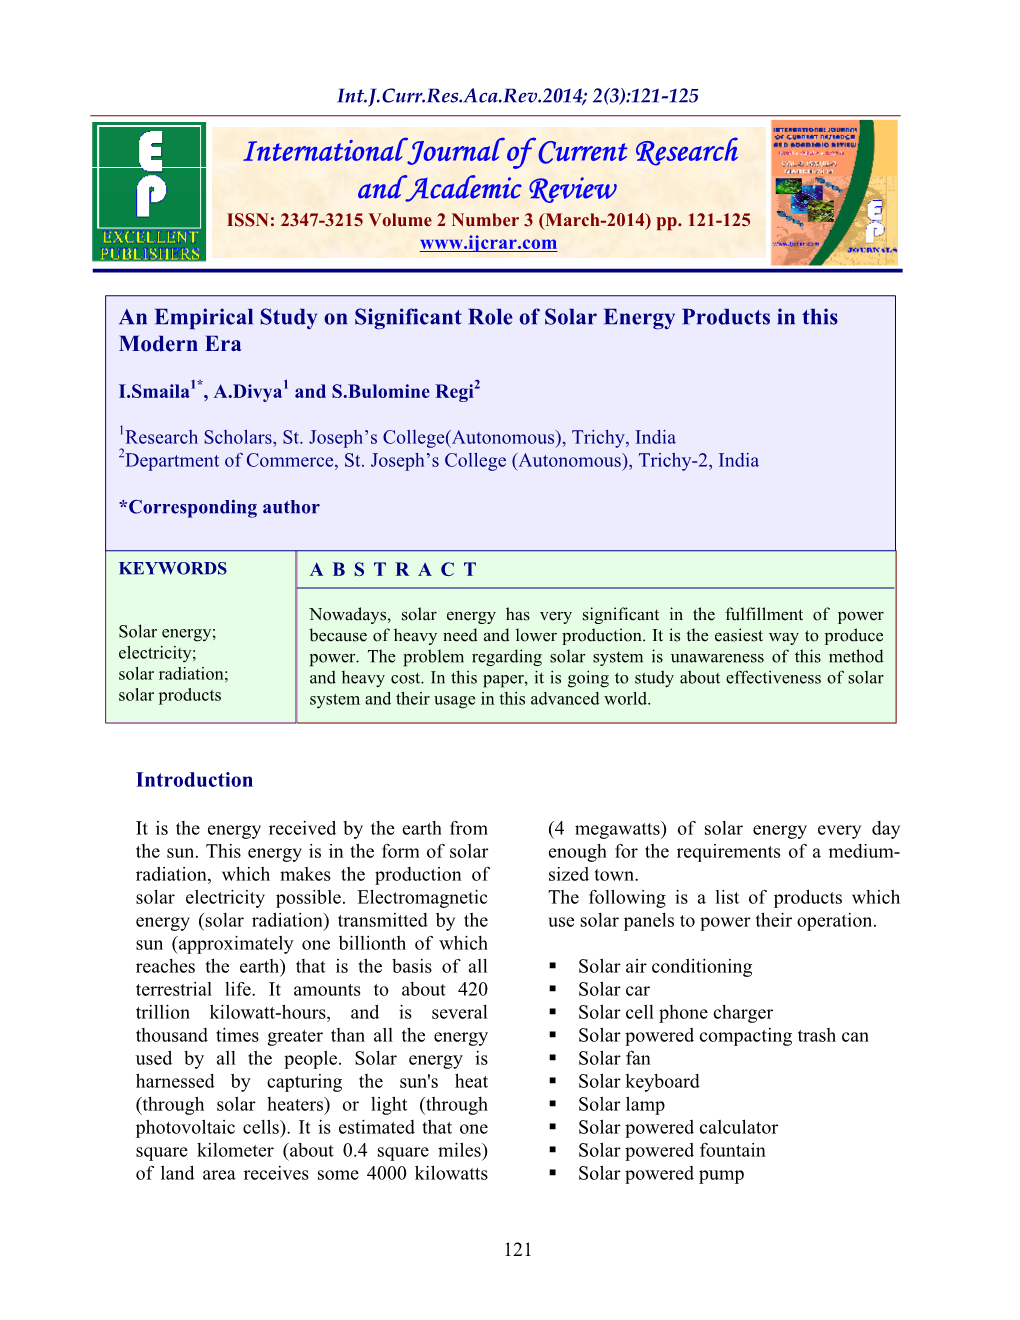 An Empirical Study on Significant Role of Solar Energy Products in This Modern Era